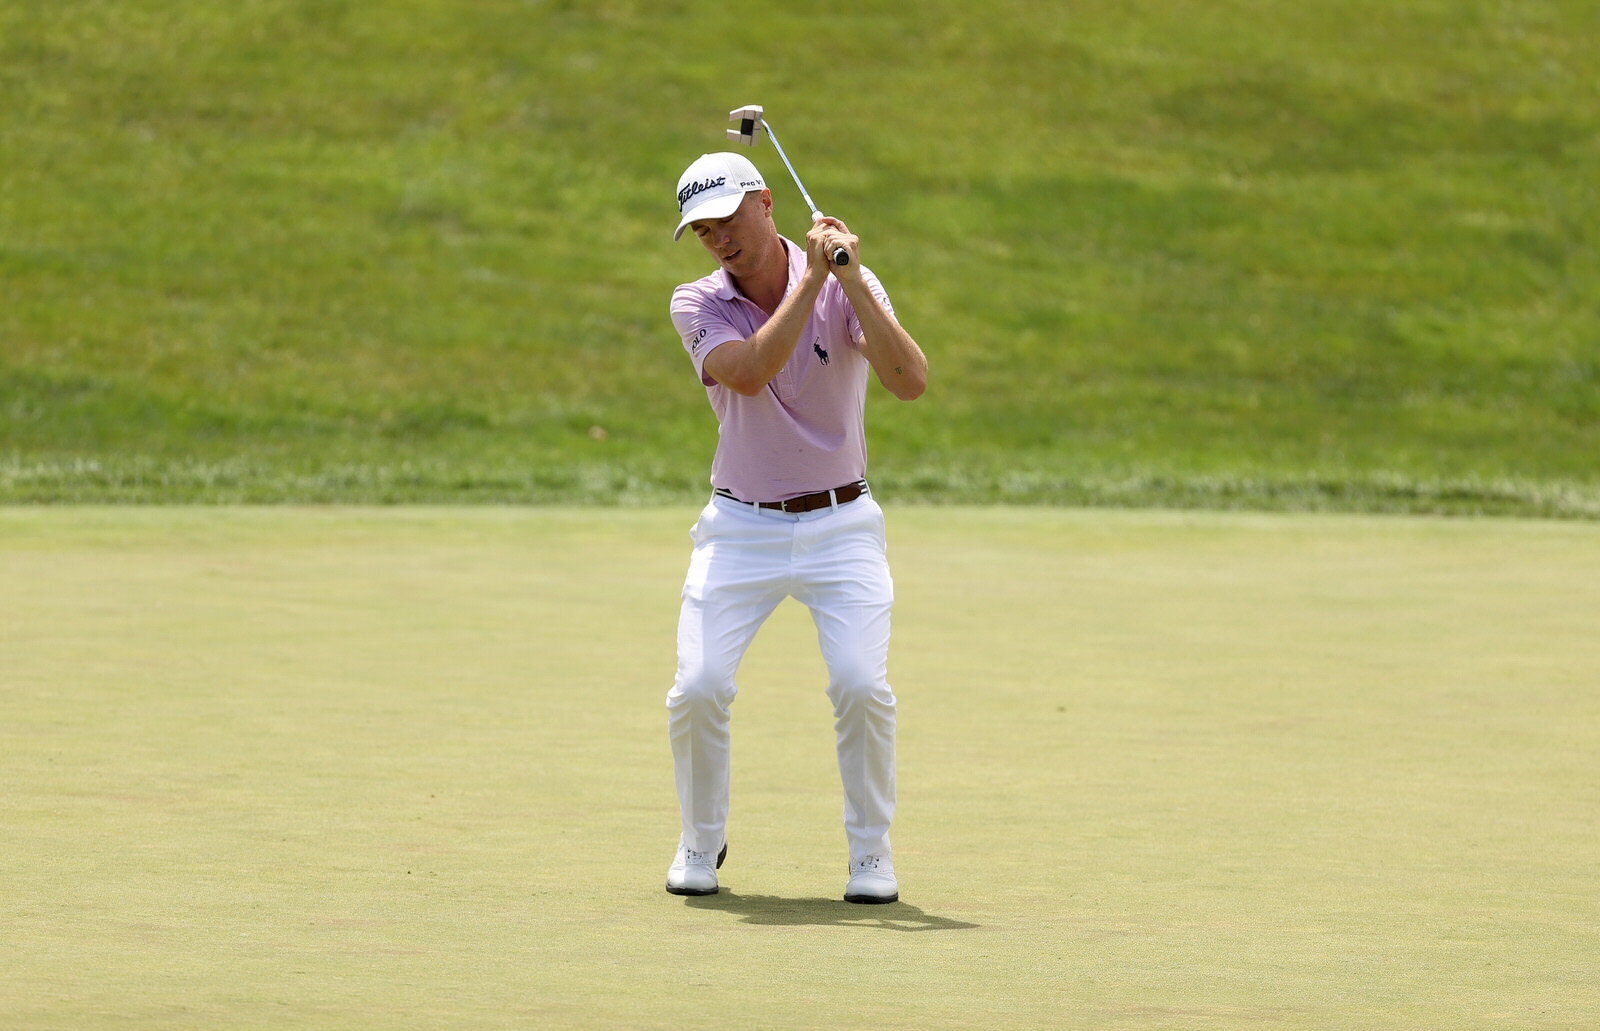  DUBLIN, OHIO - JULY 12: Justin Thomas of the United States reacts to his missed par putt on the 18th green during the final round of the Workday Charity Open on July 12, 2020 at Muirfield Village Golf Club in Dublin, Ohio. (Photo by Gregory Shamus/G